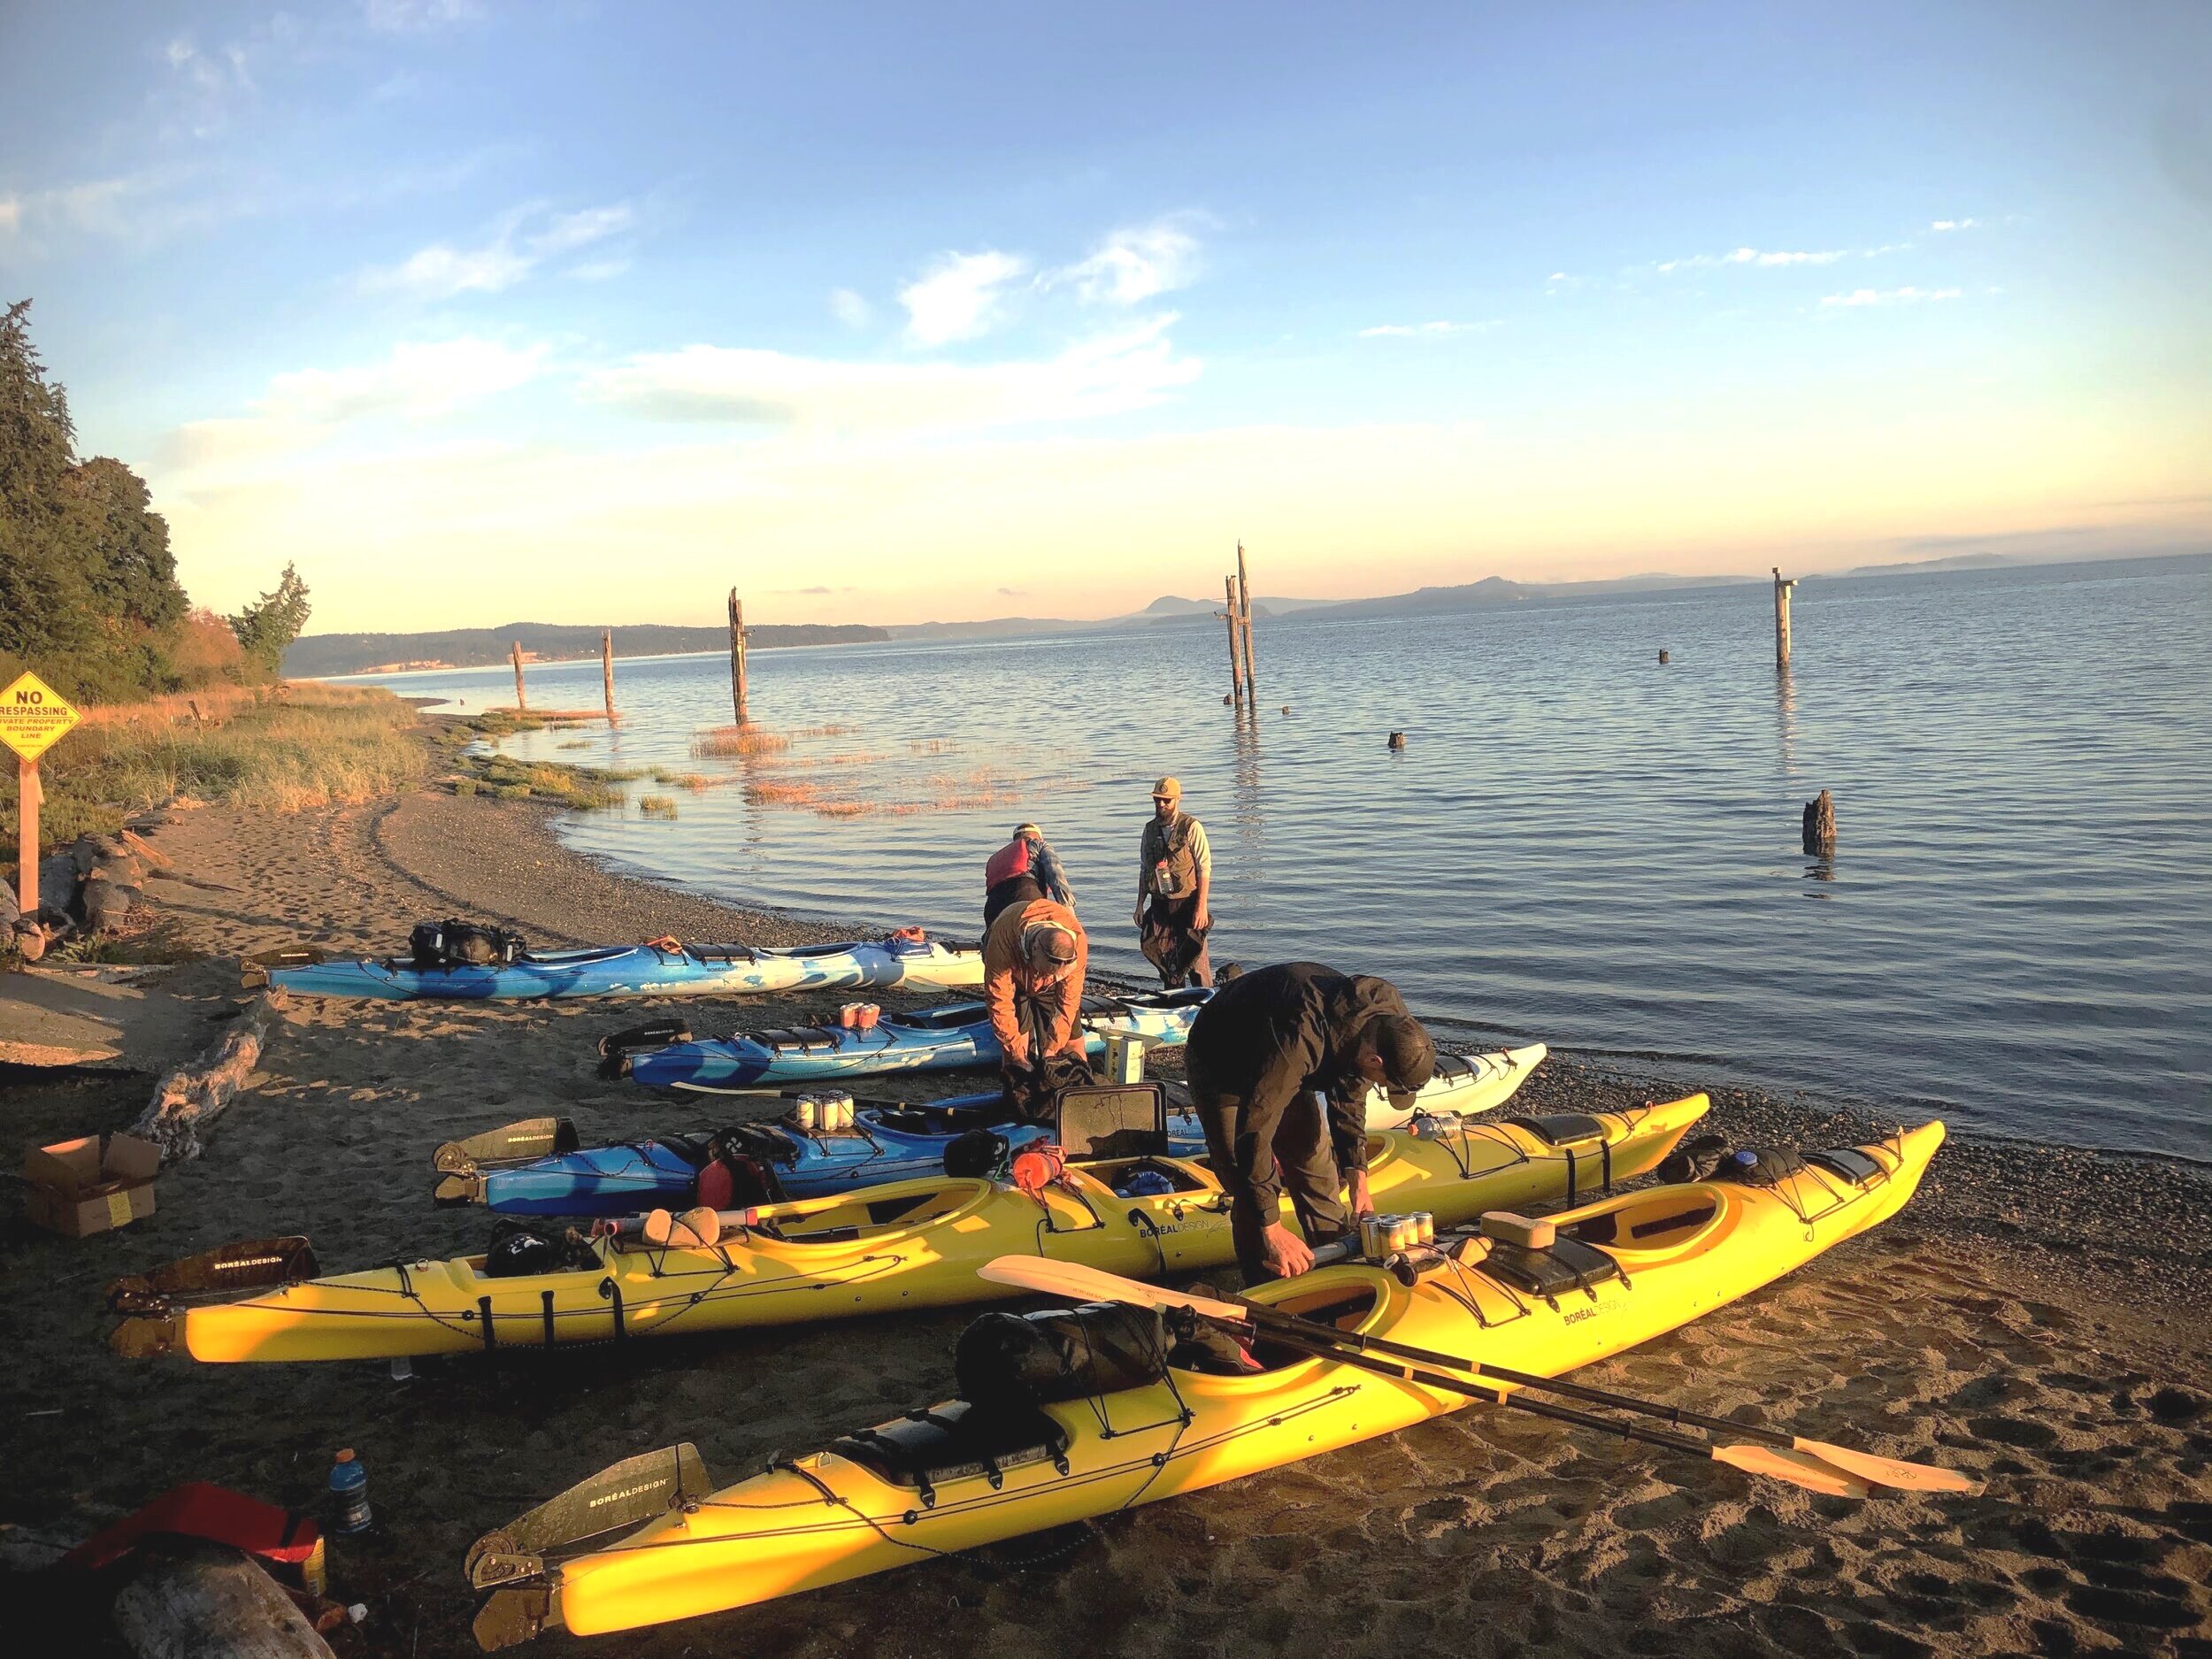 Some of the teams preparing their kayaks on the beach of Camano Island before setting off on a 3.5 day adventure.